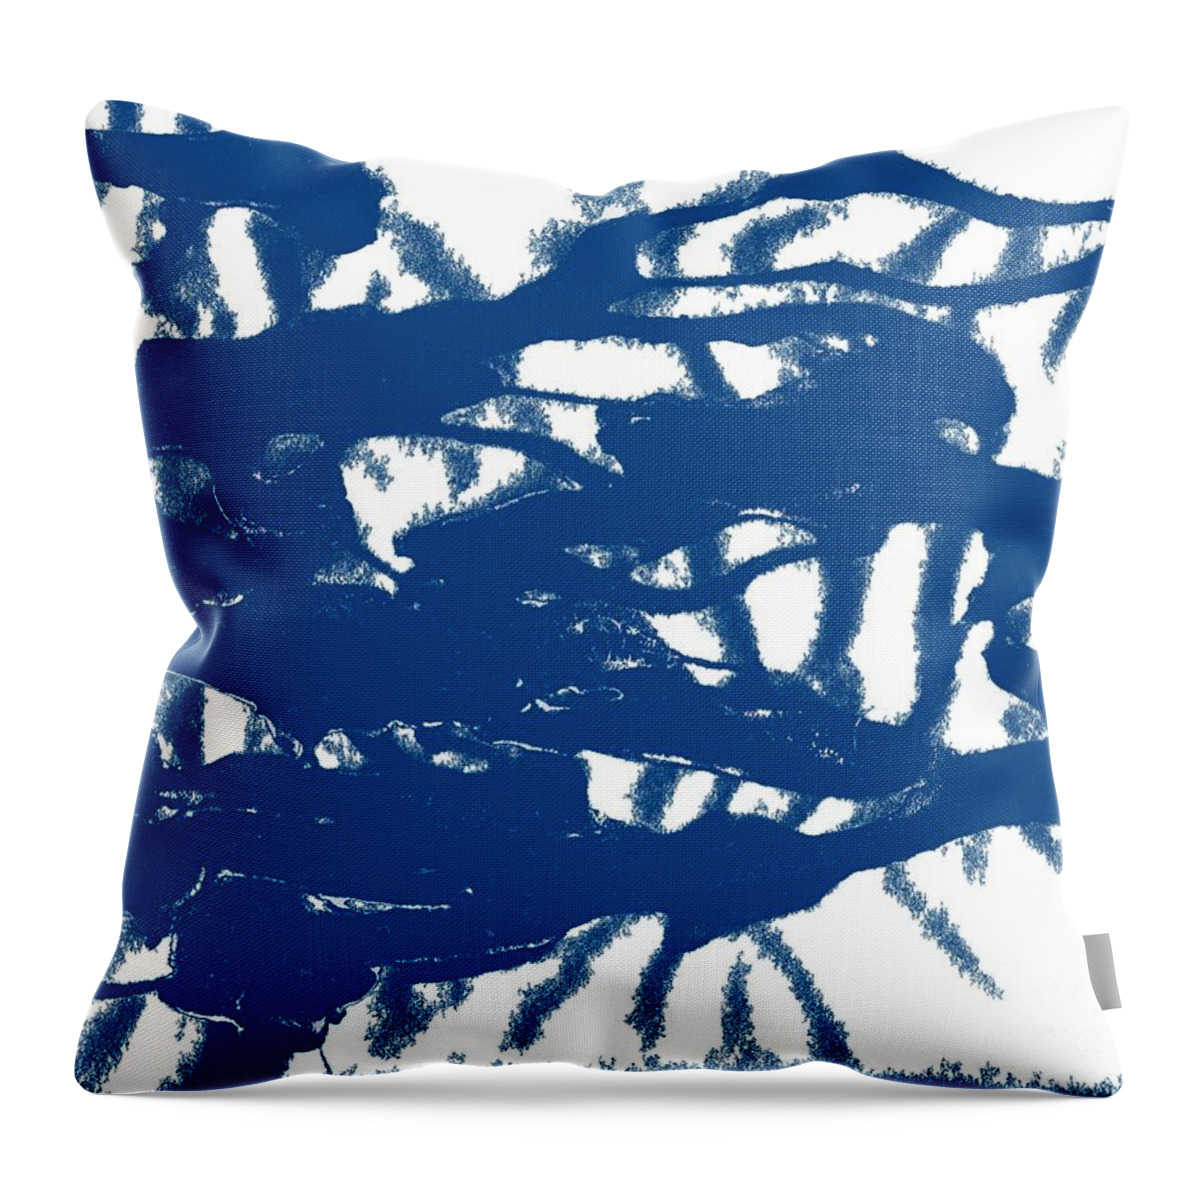 Coronavirus Throw Pillow featuring the painting Blue Sponged Splatter Abstract Art Painting by Joseph Baril